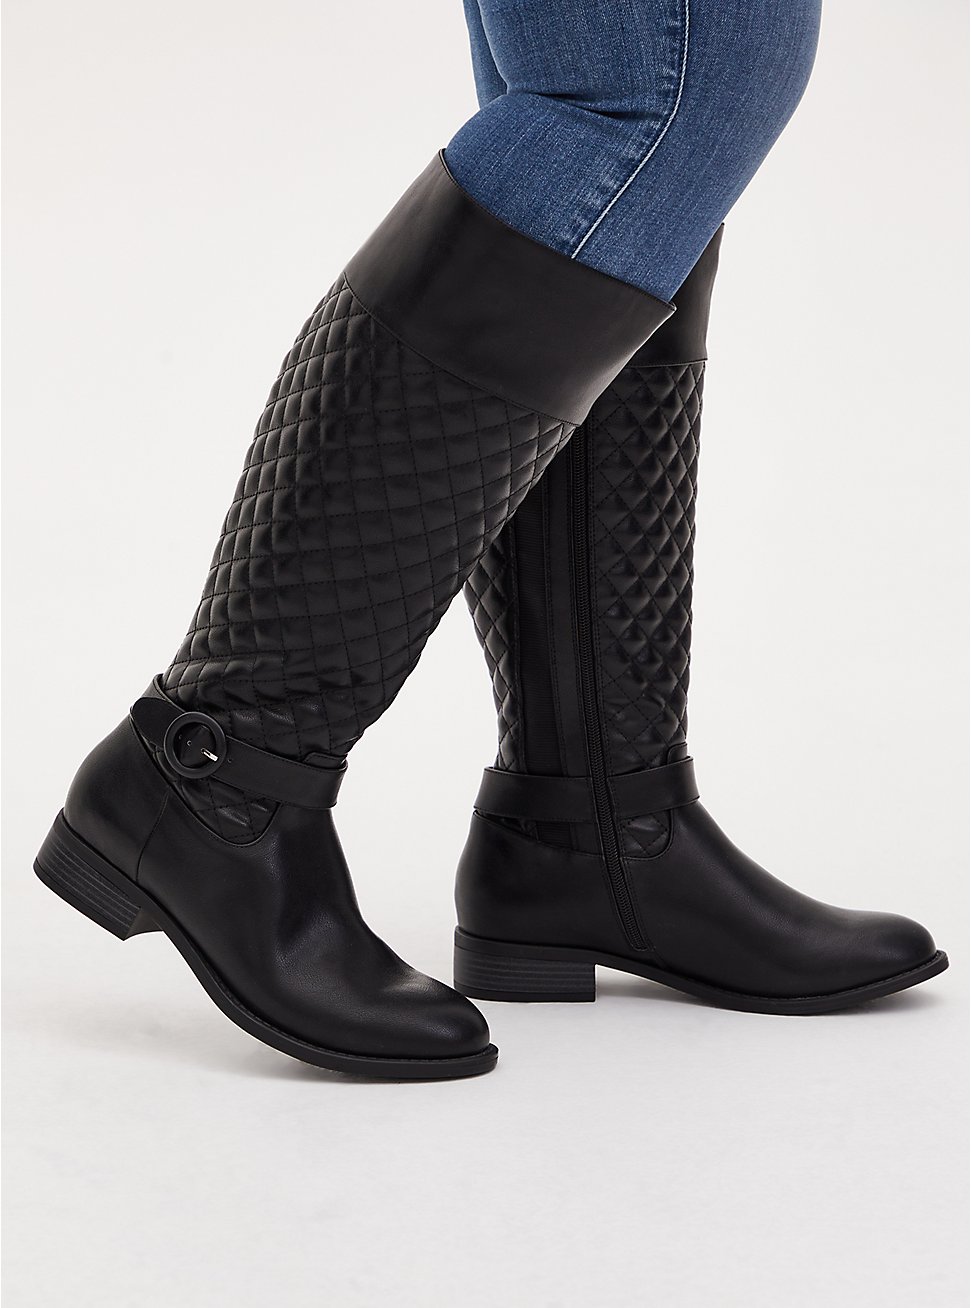 Black Quilted Faux Leather Knee-High Boot (WW), BLACK, hi-res